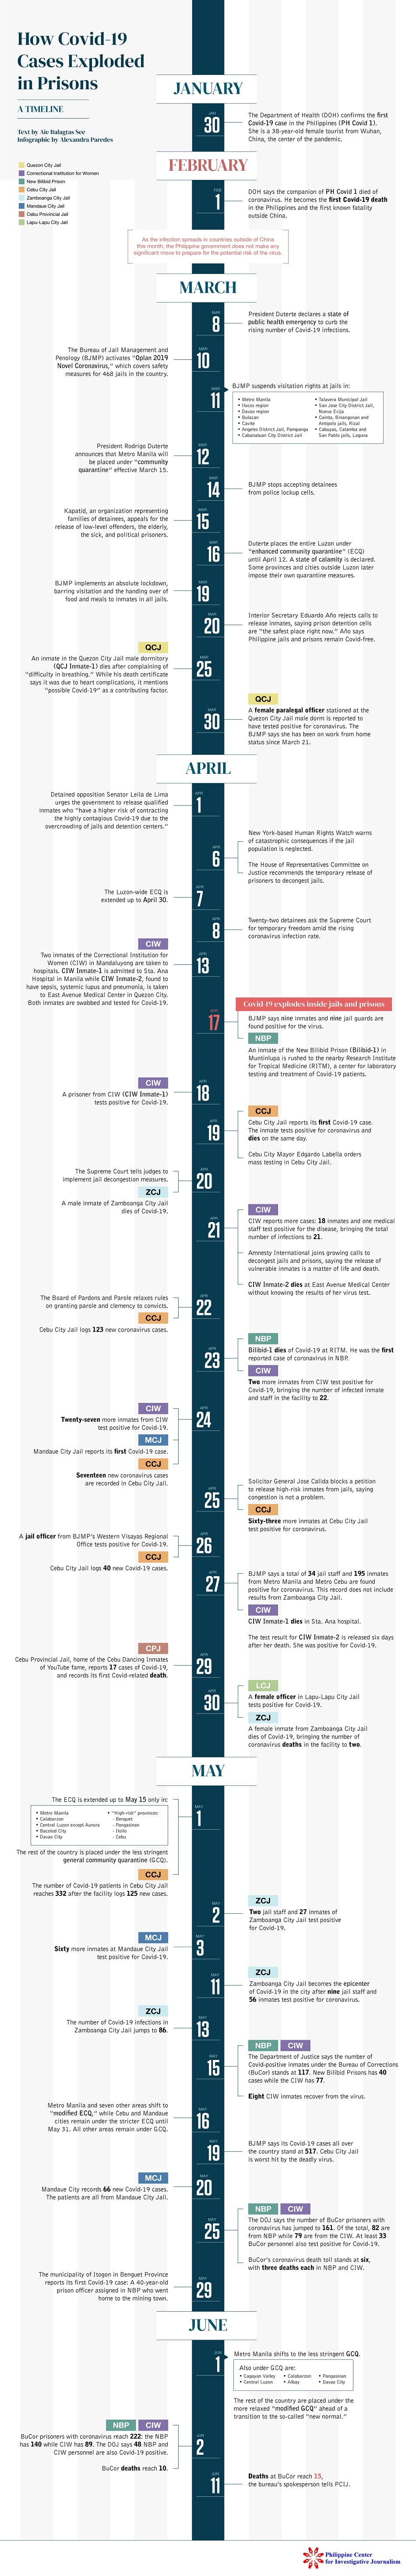 How COVID-19 cases exploded in prisons: A timeline 2